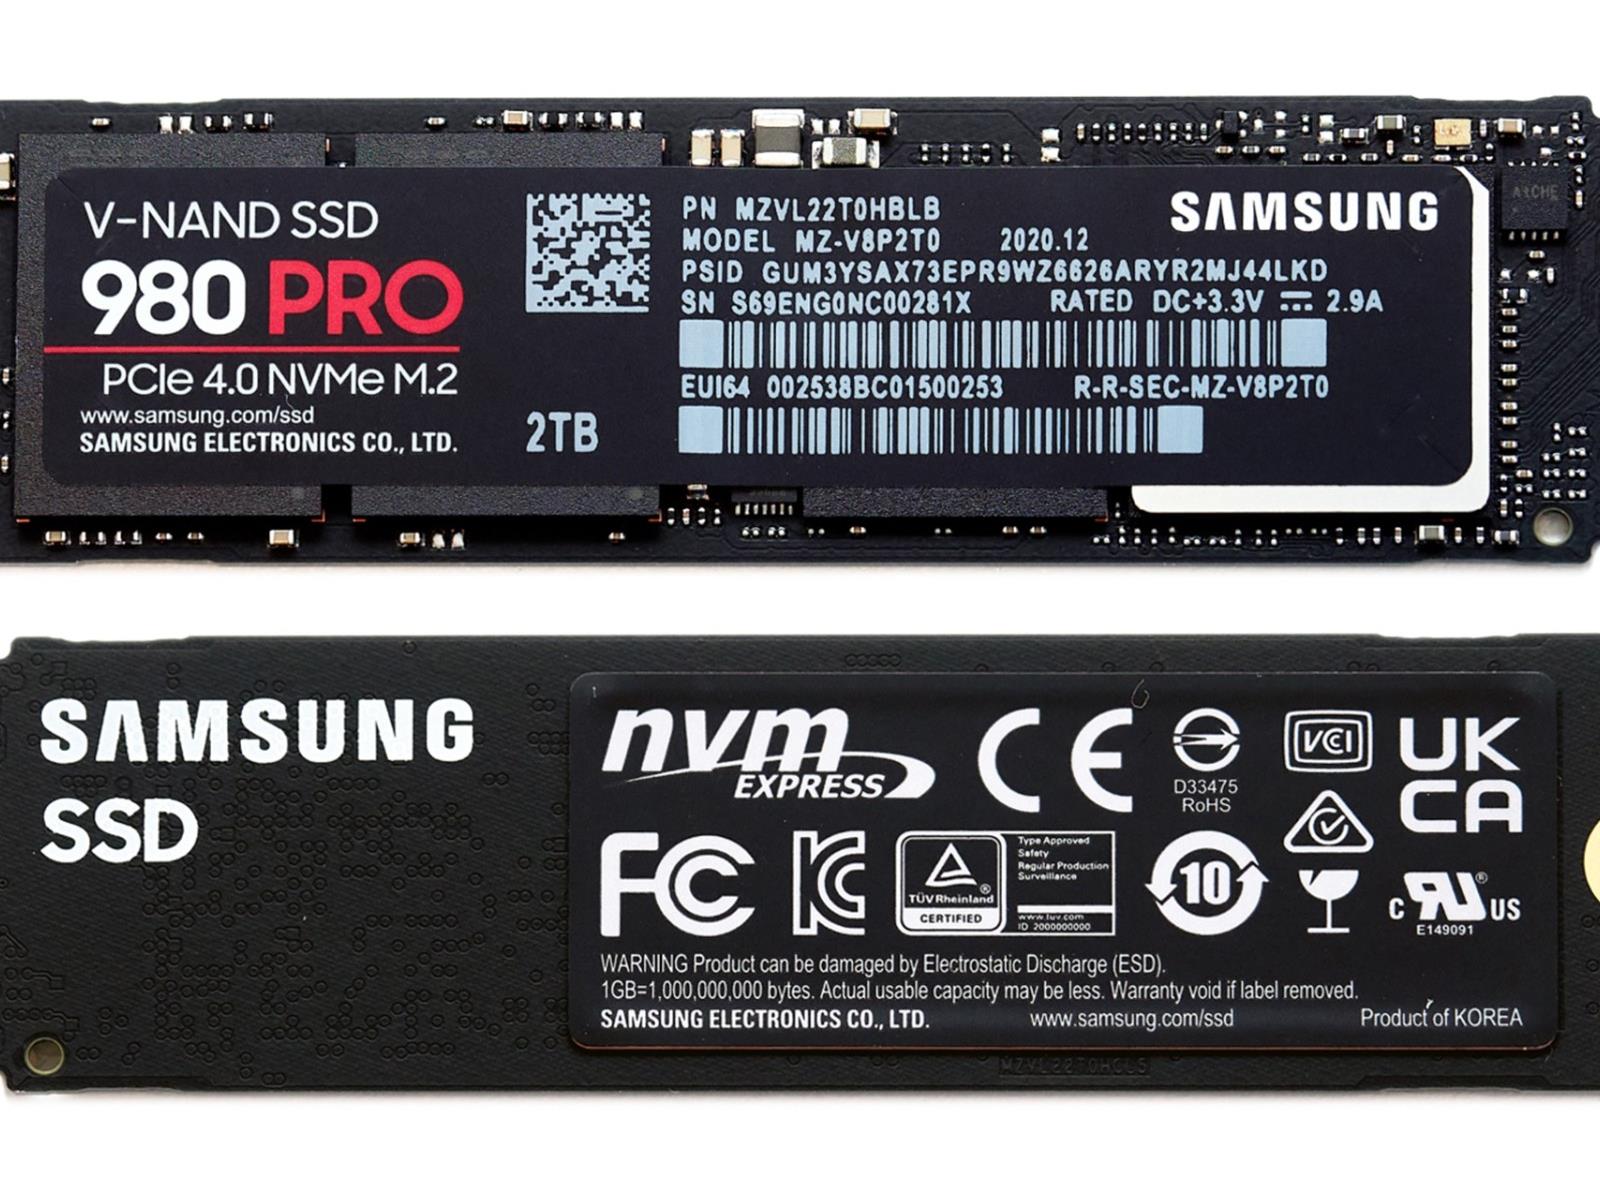 Courageous Beyond doubt Phonetics Samsung SSD 980 Pro 2TB Review: Flagship PCIe 4 NVMe Storage | HotHardware